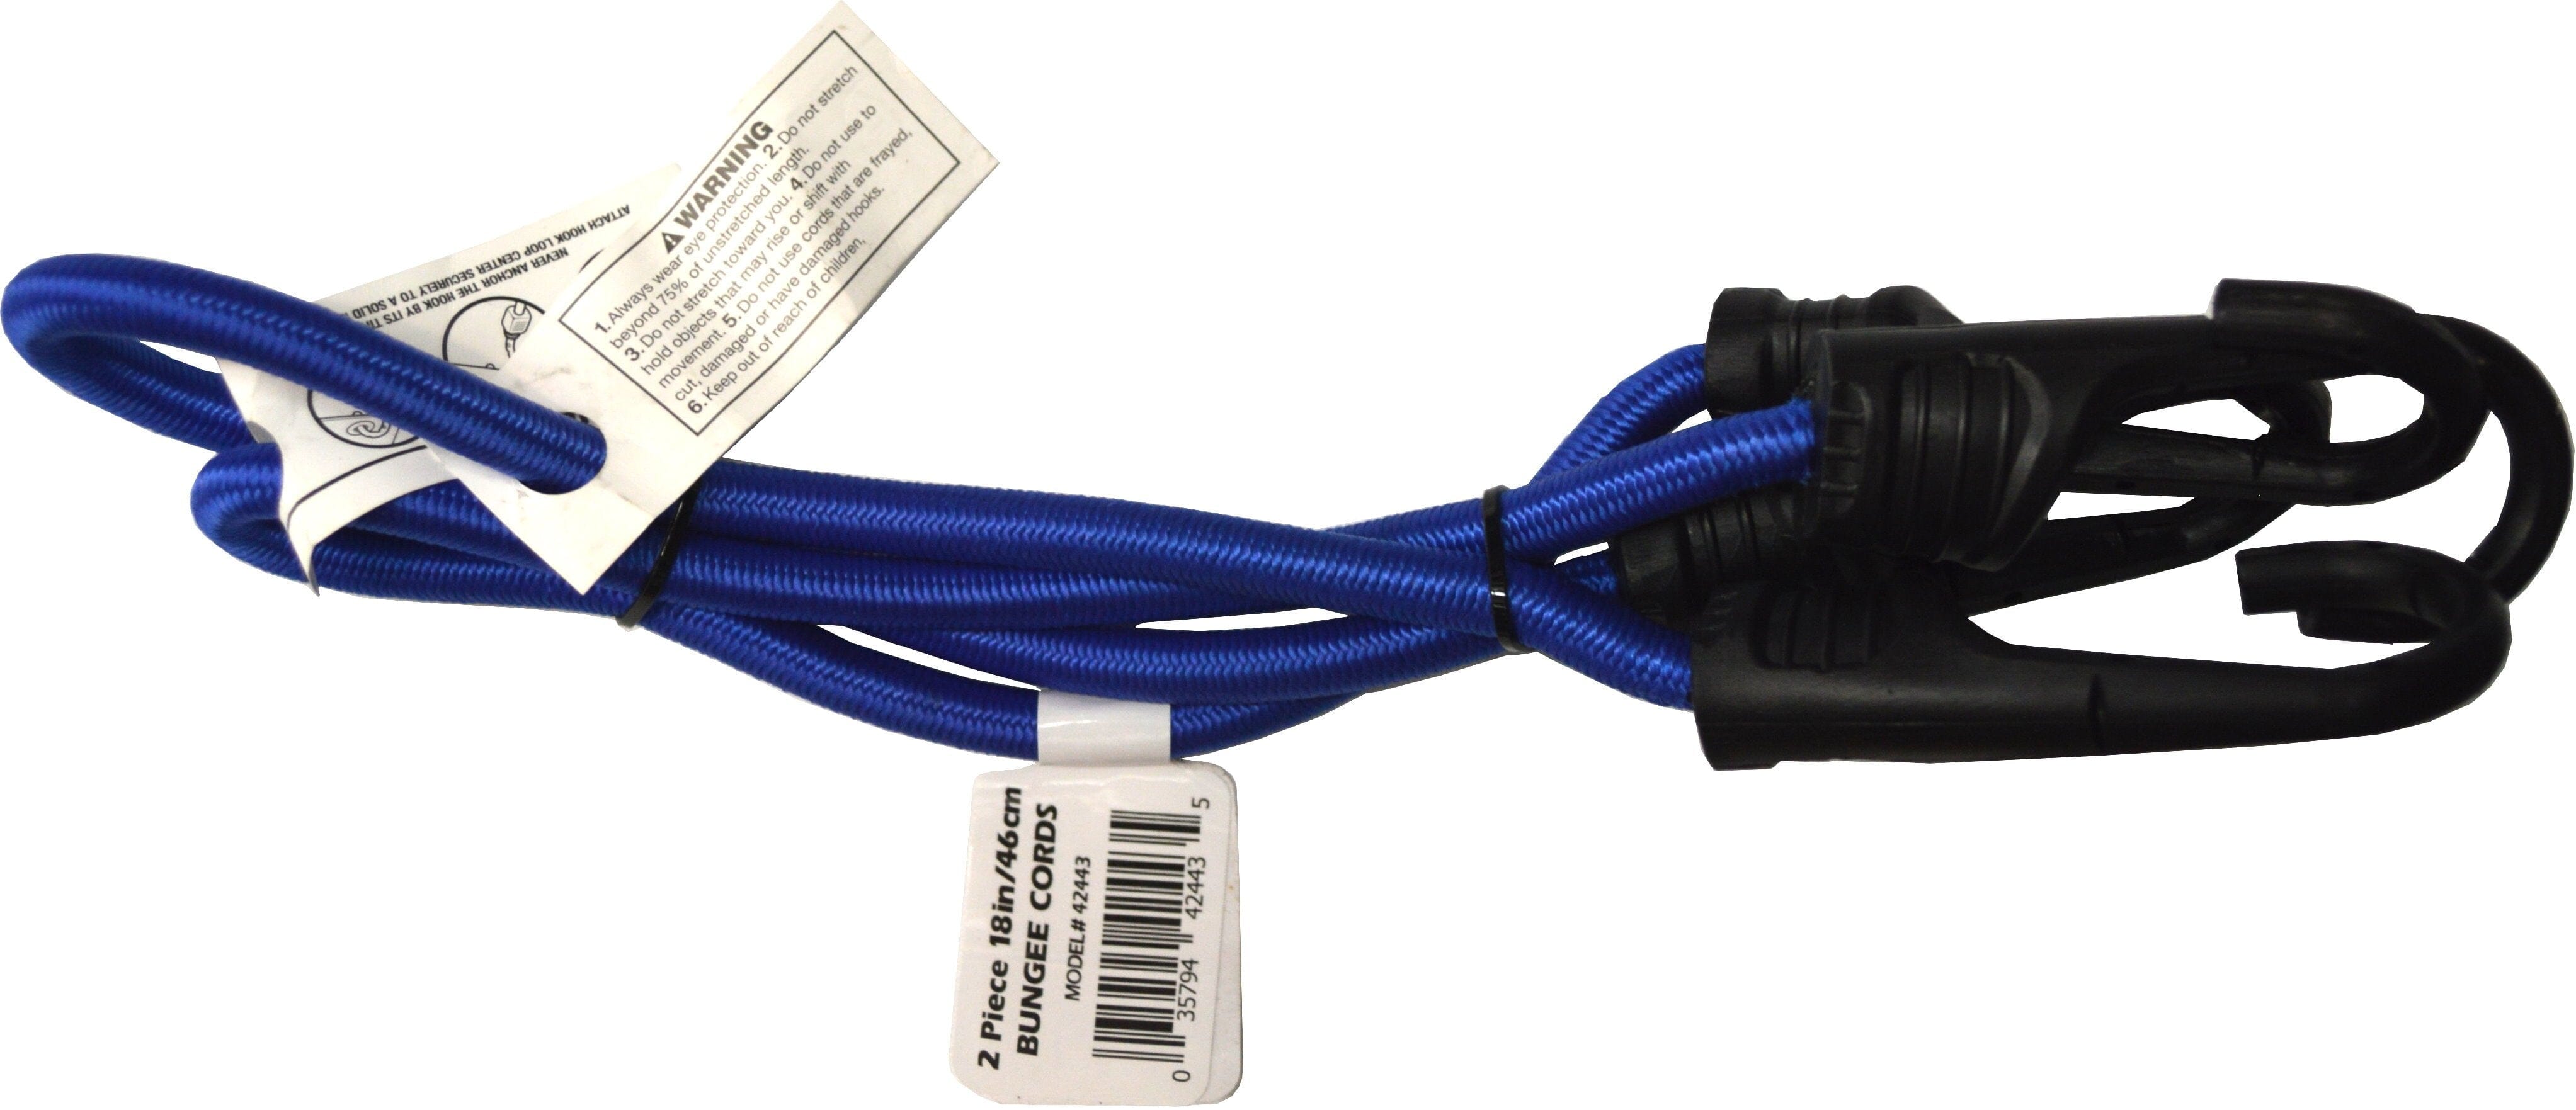 Cargoloc Bungee Cords 2-Pack - Blue #42443 450mm